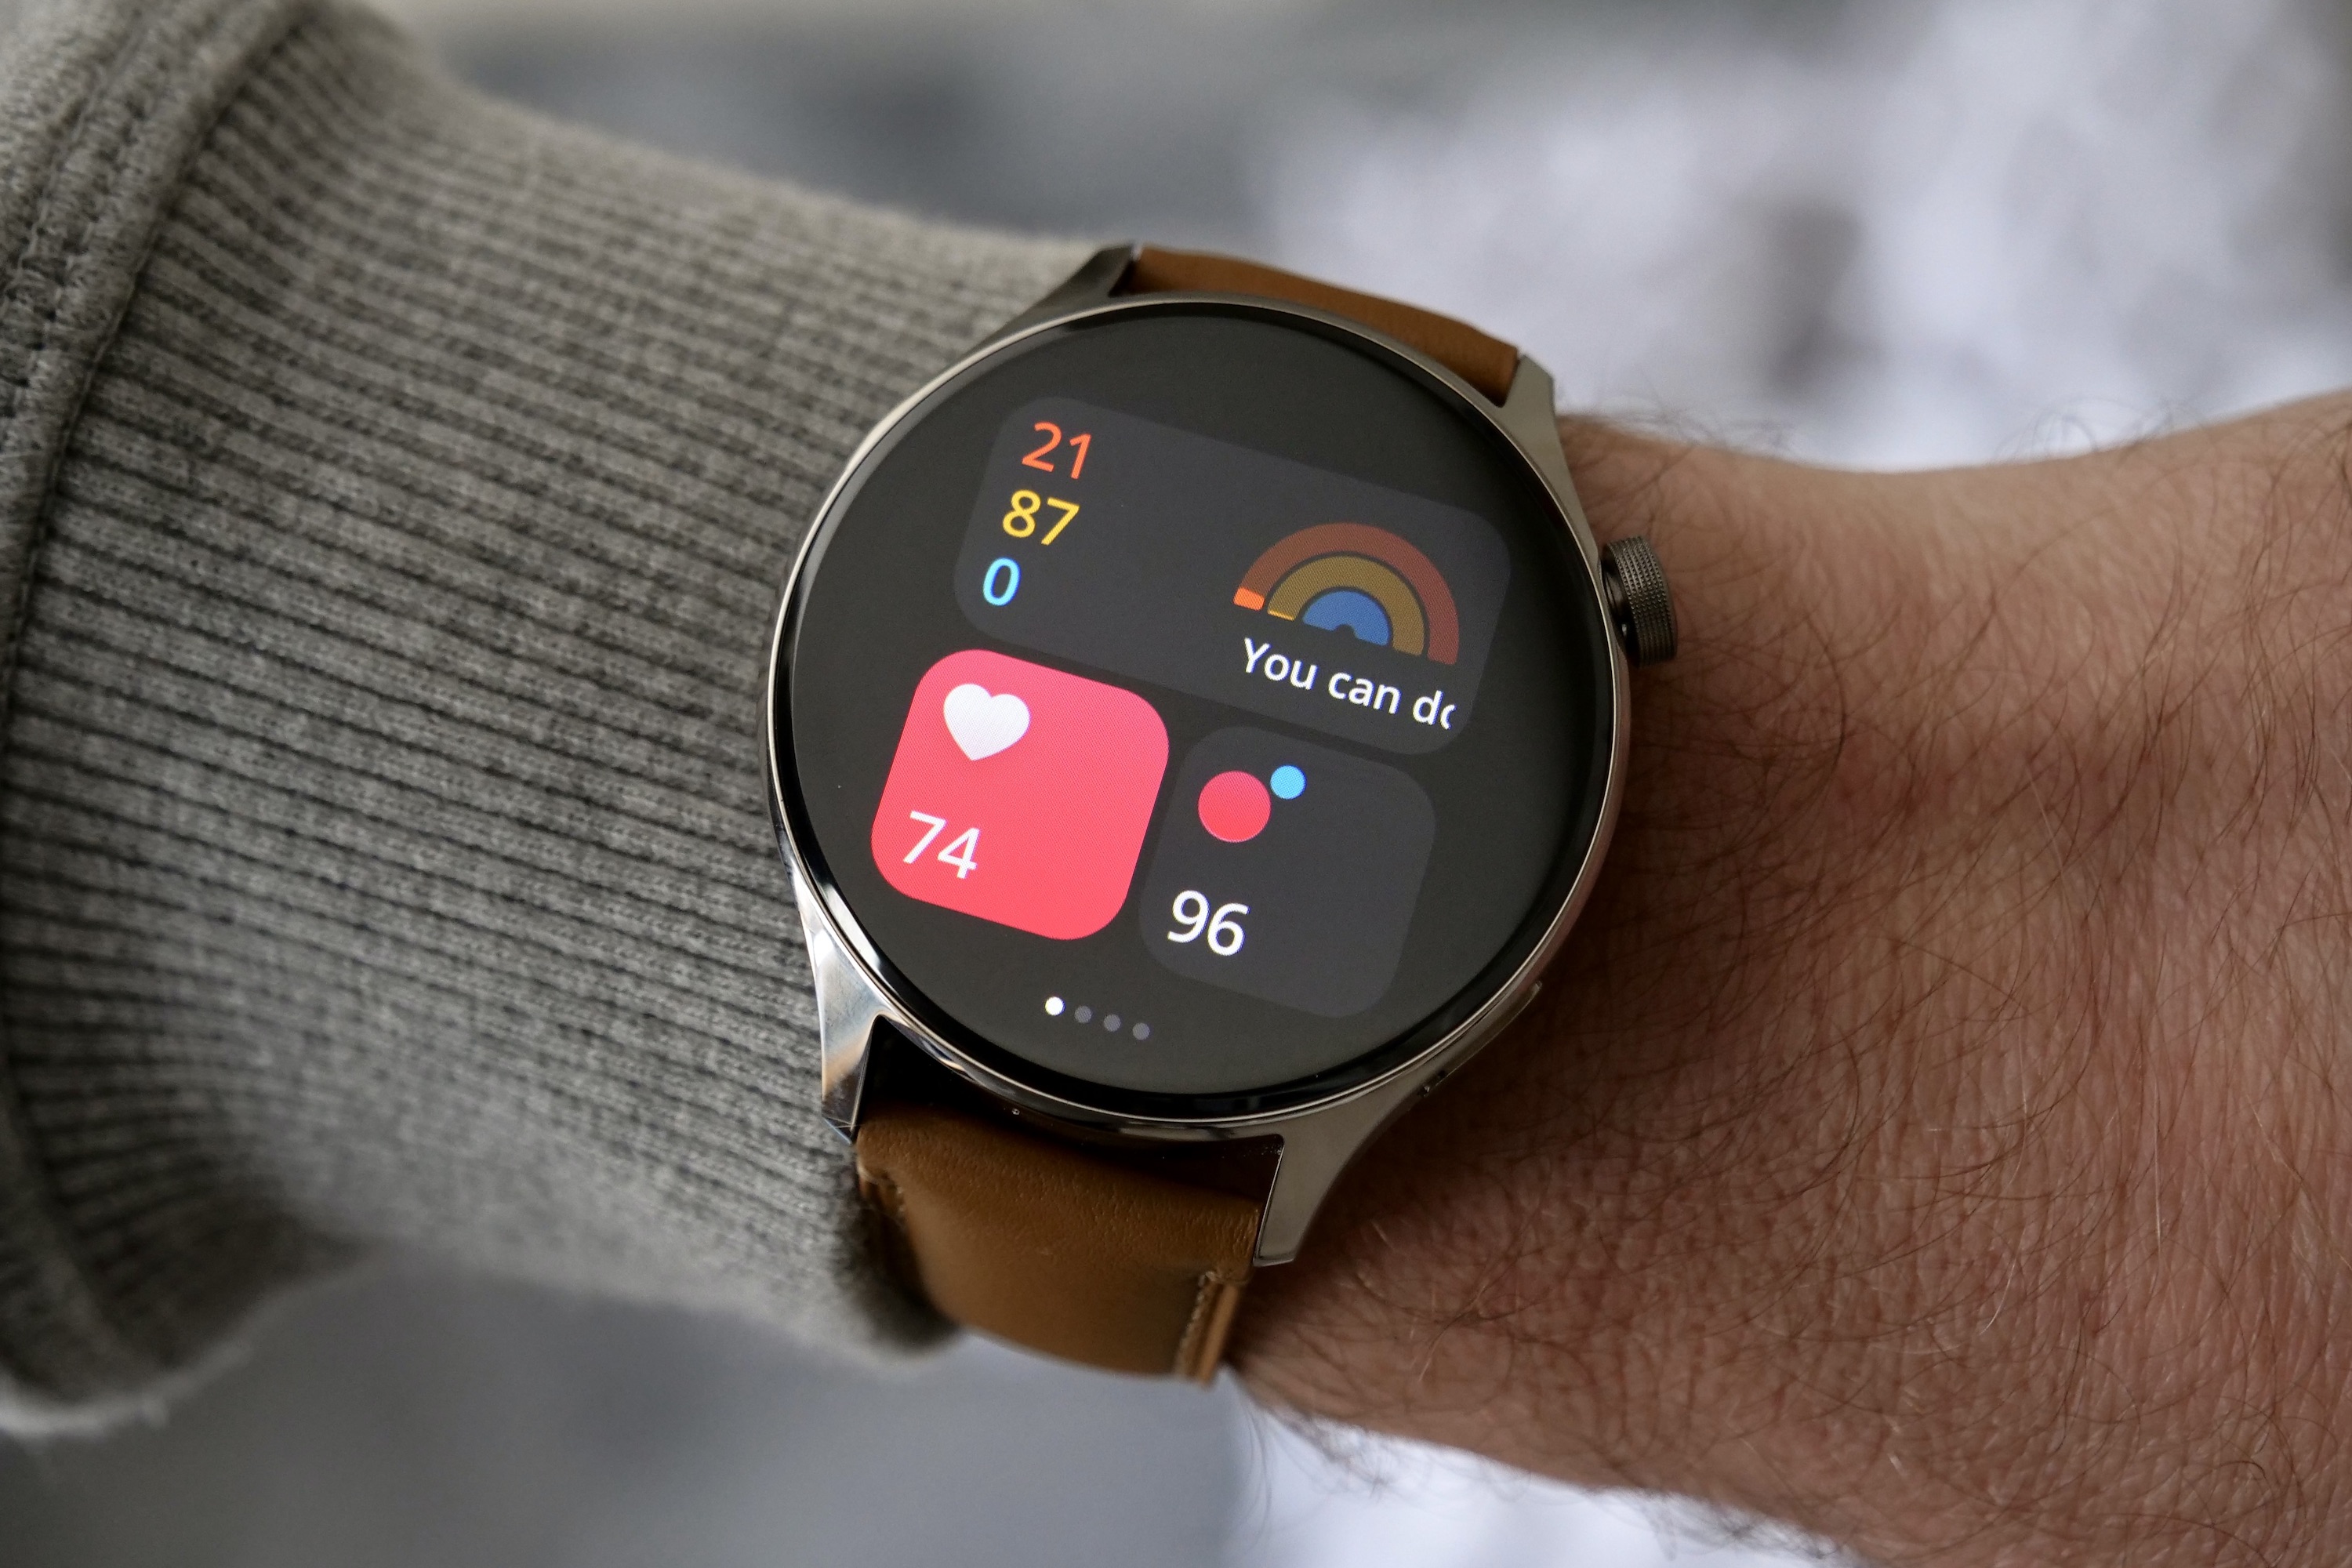 This smartwatch shows how bad the Pixel Watch's software is